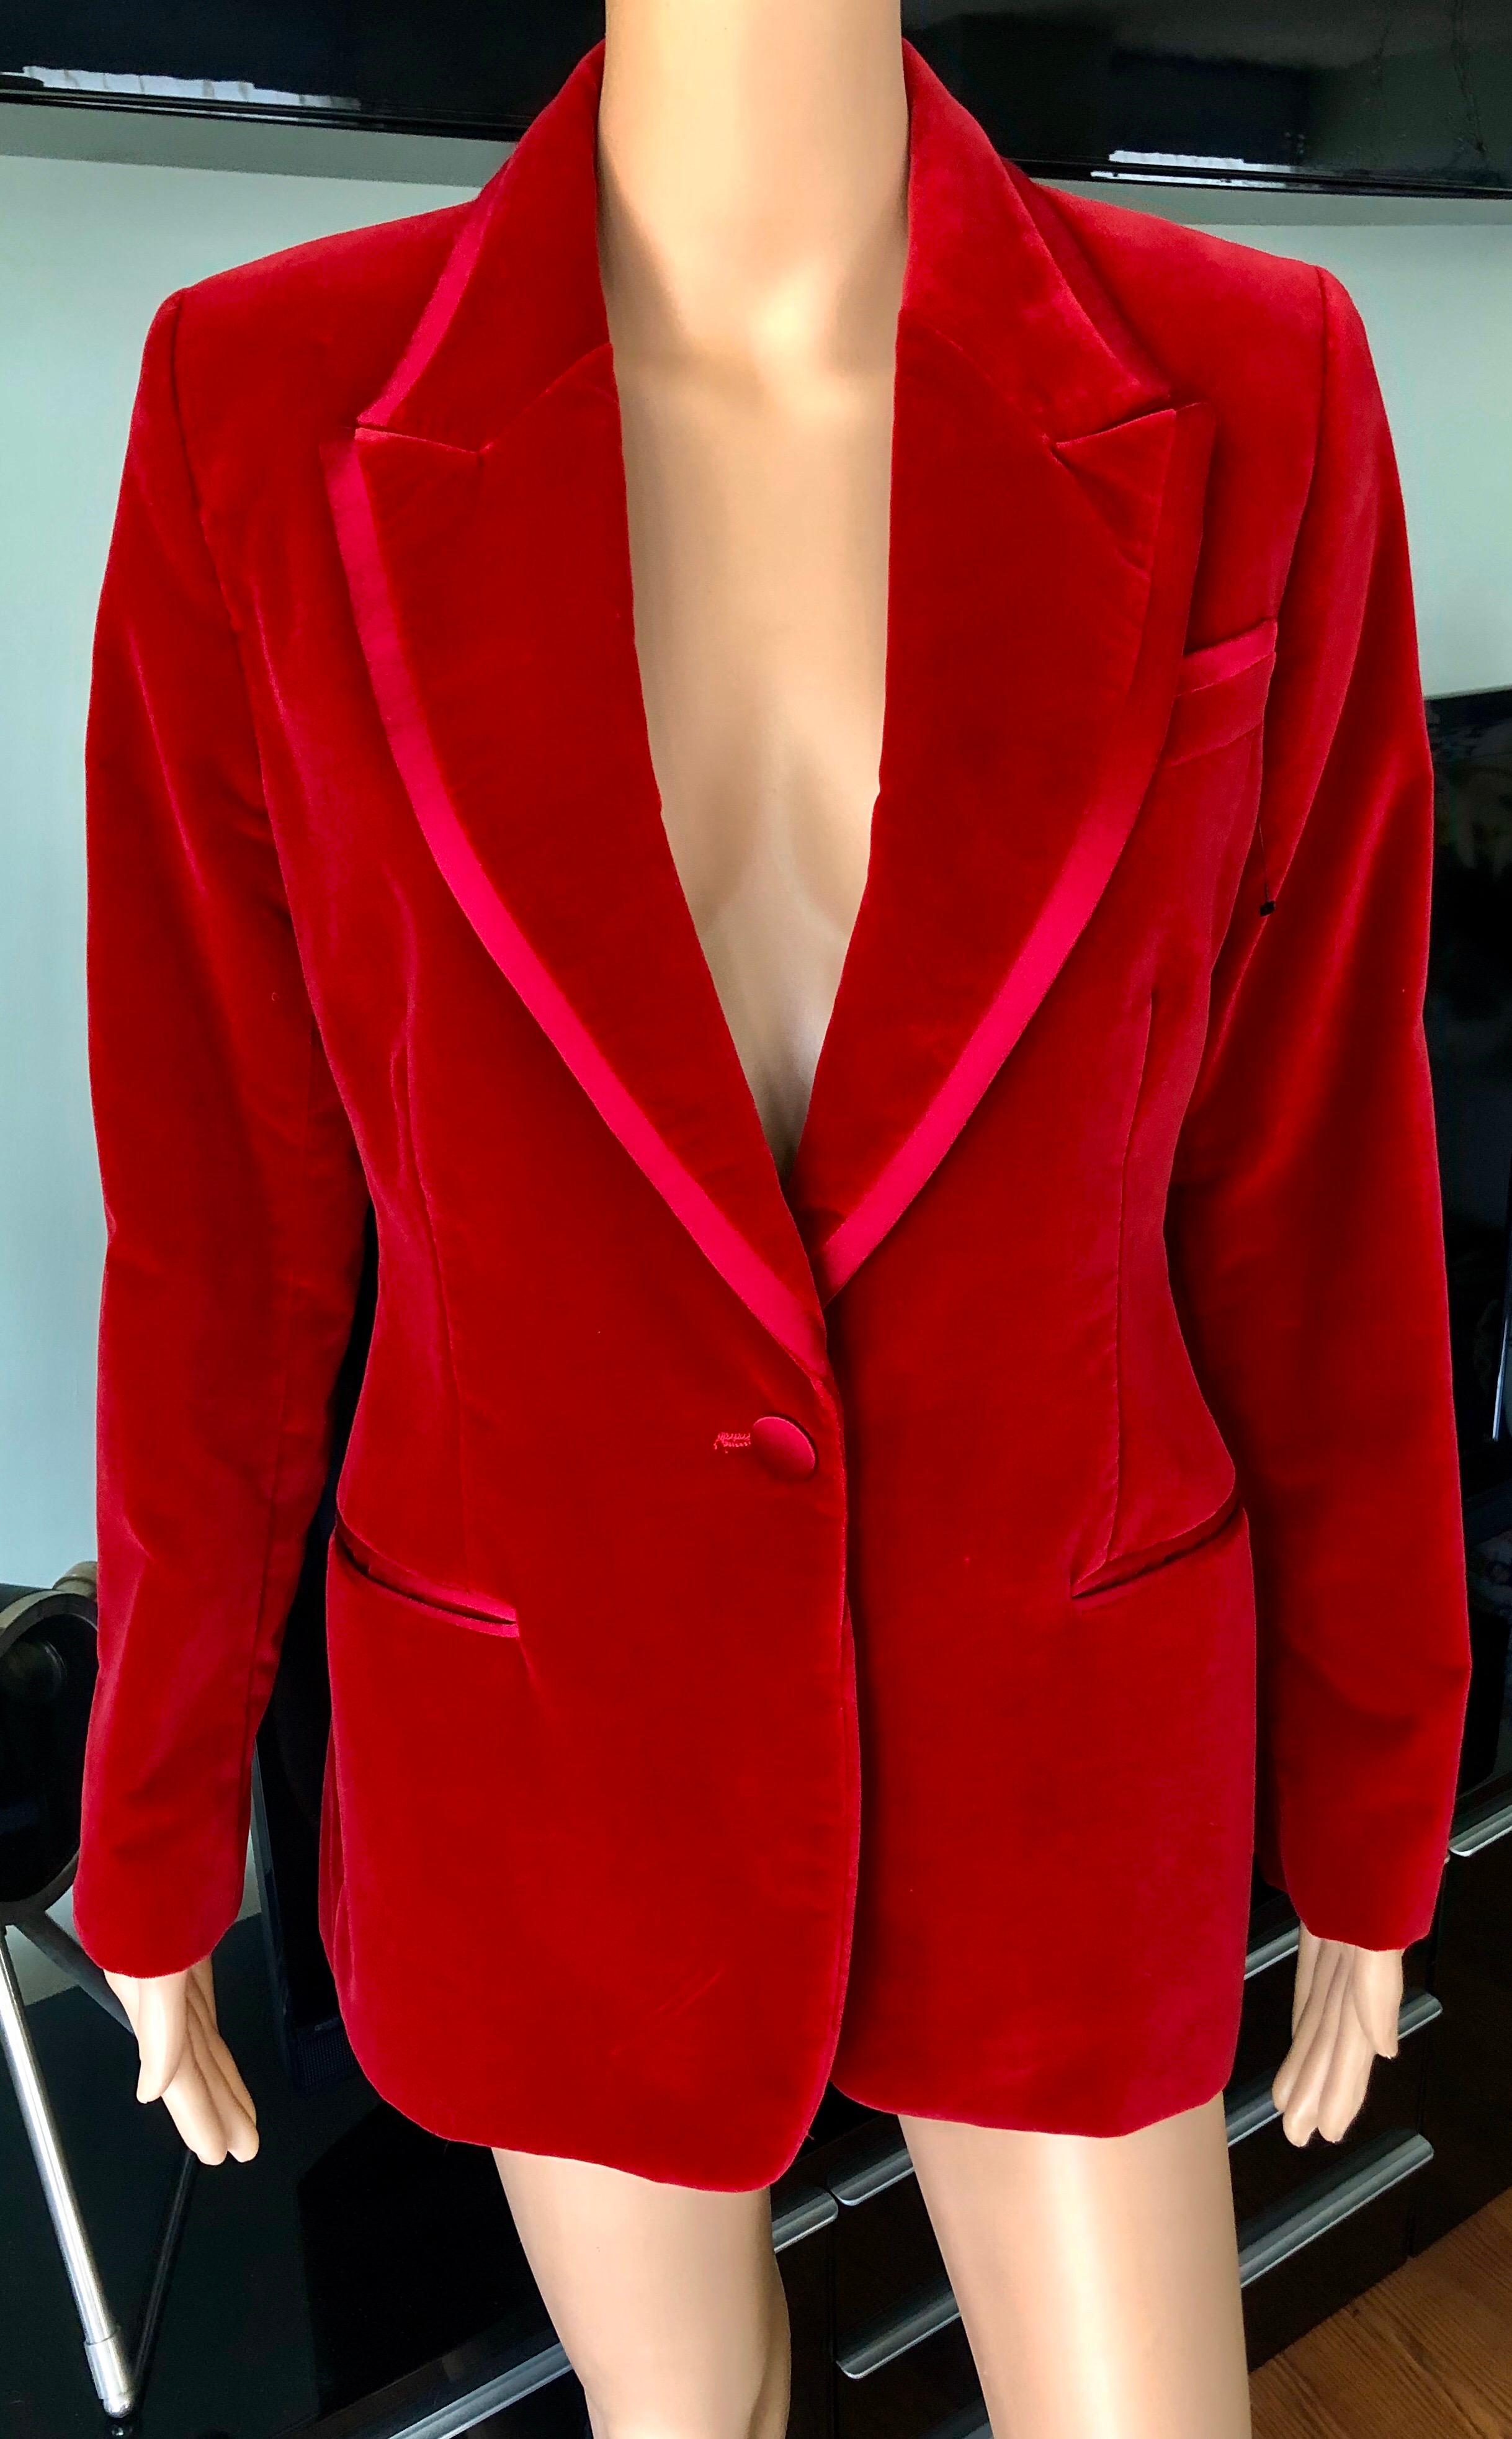 Tom Ford for Gucci F/W 1996 Runway Vintage Velvet Red Blazer Top IT 42

Look 39 from the Fall 1996 Collection Tom Ford–era Gucci red velvet blazer. Museum Piece. Editorial Piece. Excellent Condition.